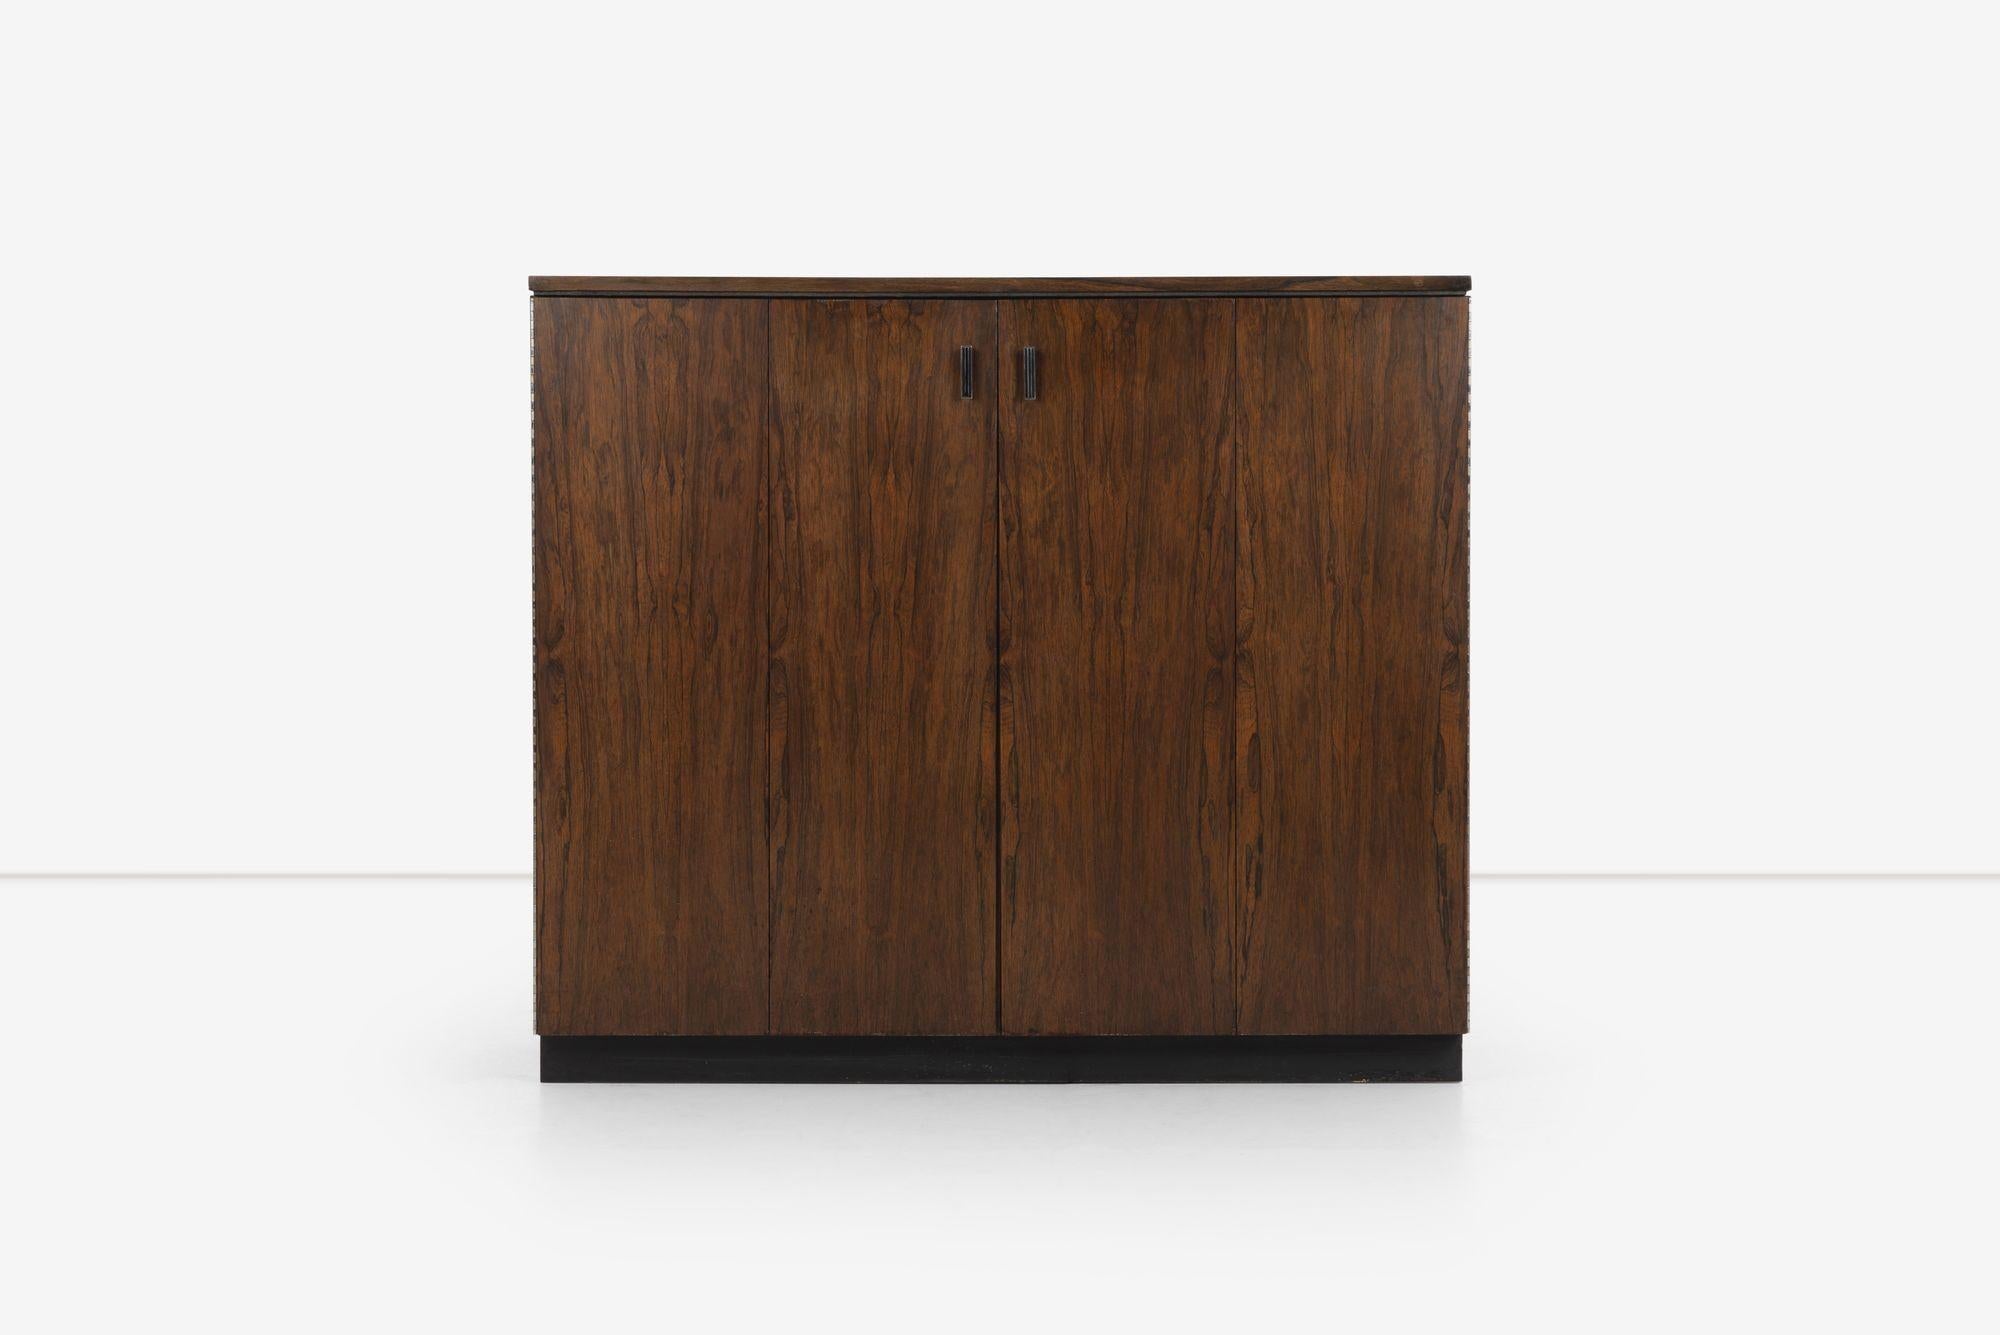 Founders Furniture Chest of Drawers in Rosewood;  features bi-fold doors concealing five drawers with six adjustable, removable shelves on a plinth base.